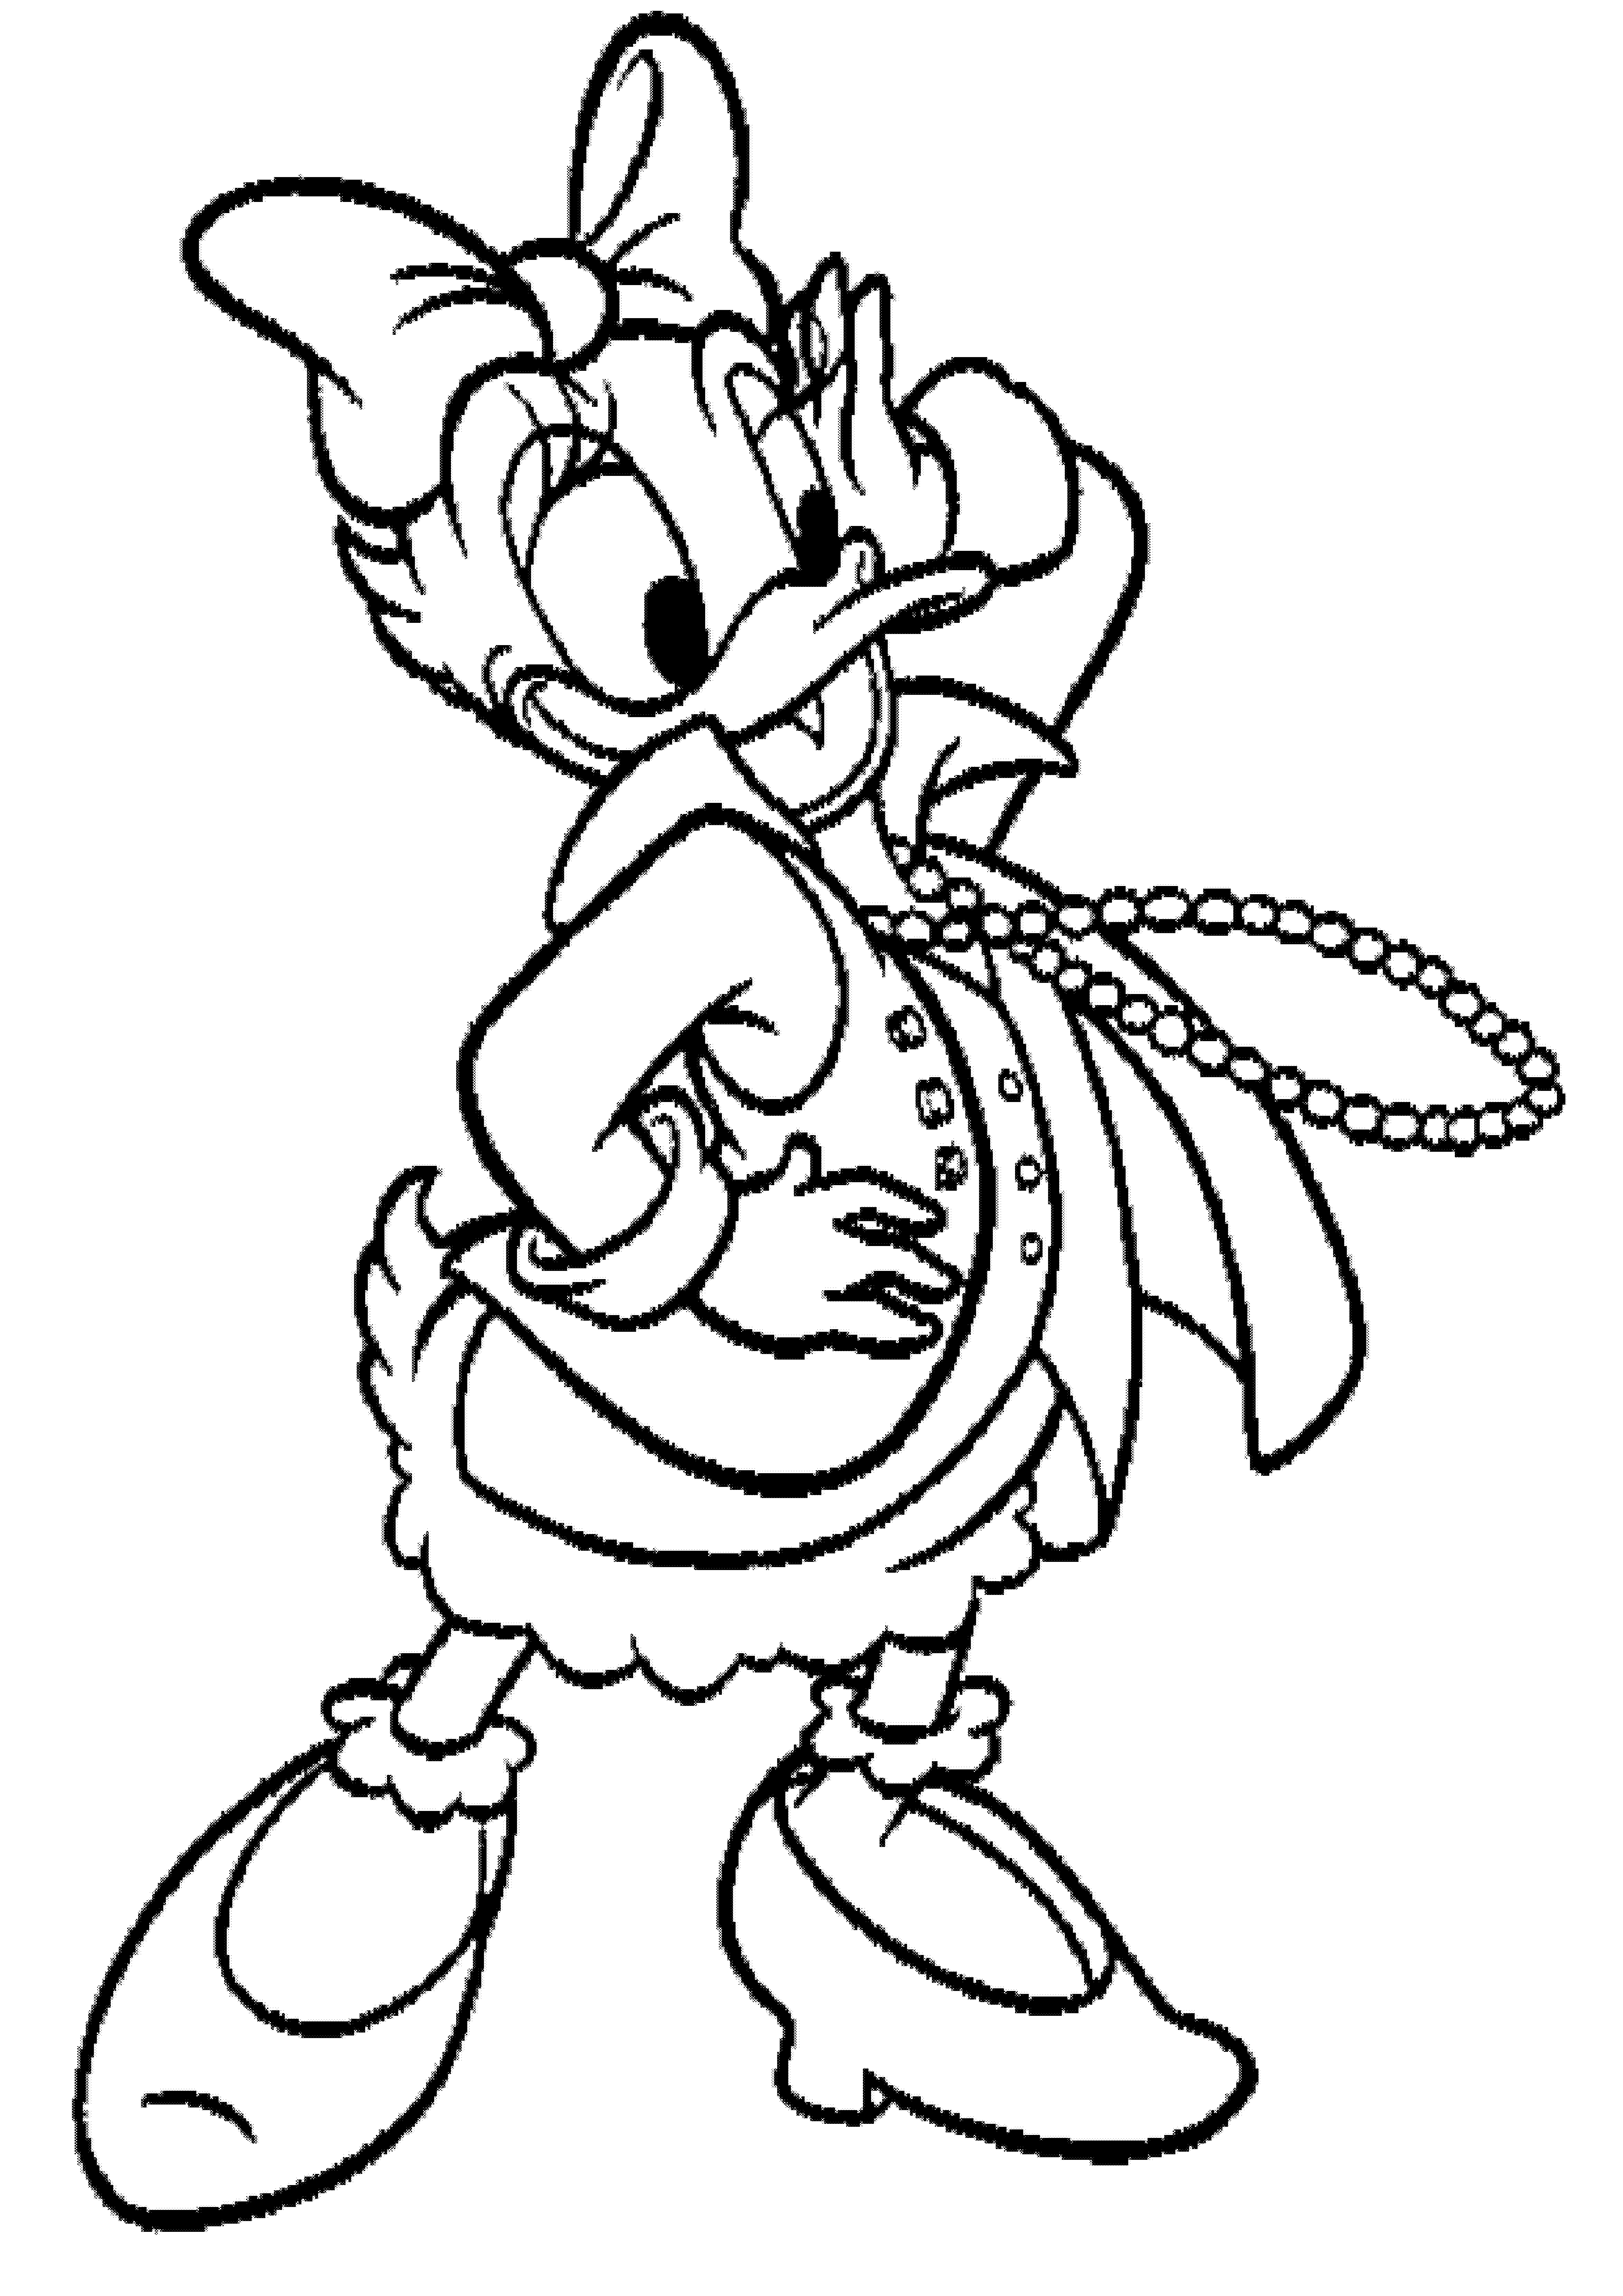 928 Cute Daisy Duck Coloring Pages Free with Printable